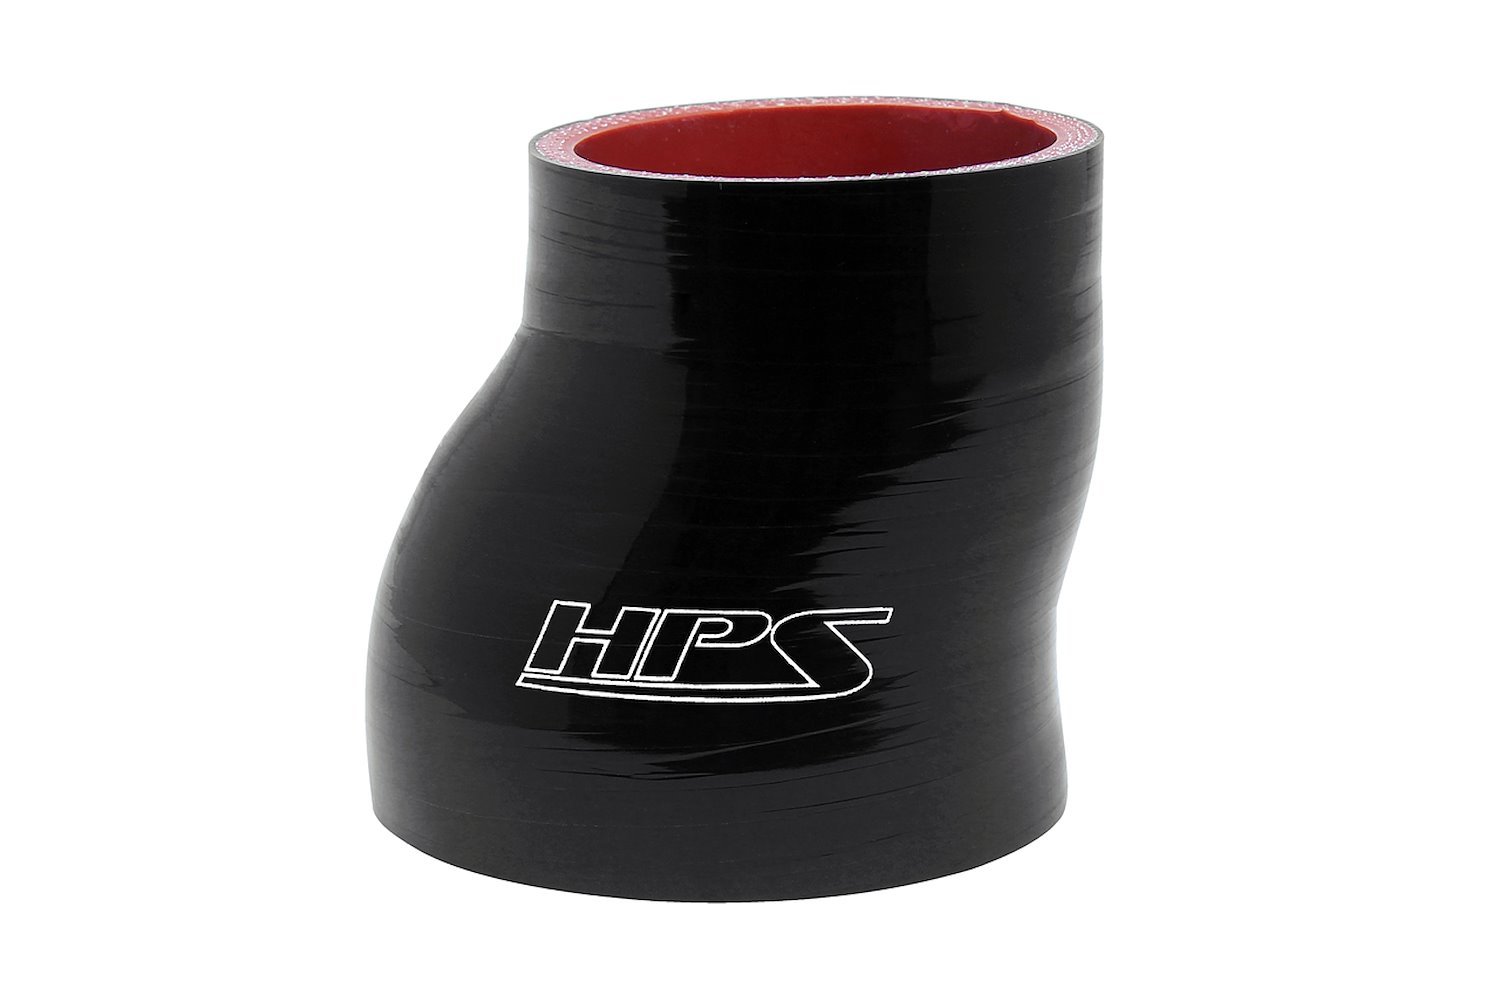 HTSOR-200-300-BLK Silicone Offset Reducer Hose, High-Temp Reinforced, 2 in. - 3 in. ID, 3 in. Long, Black